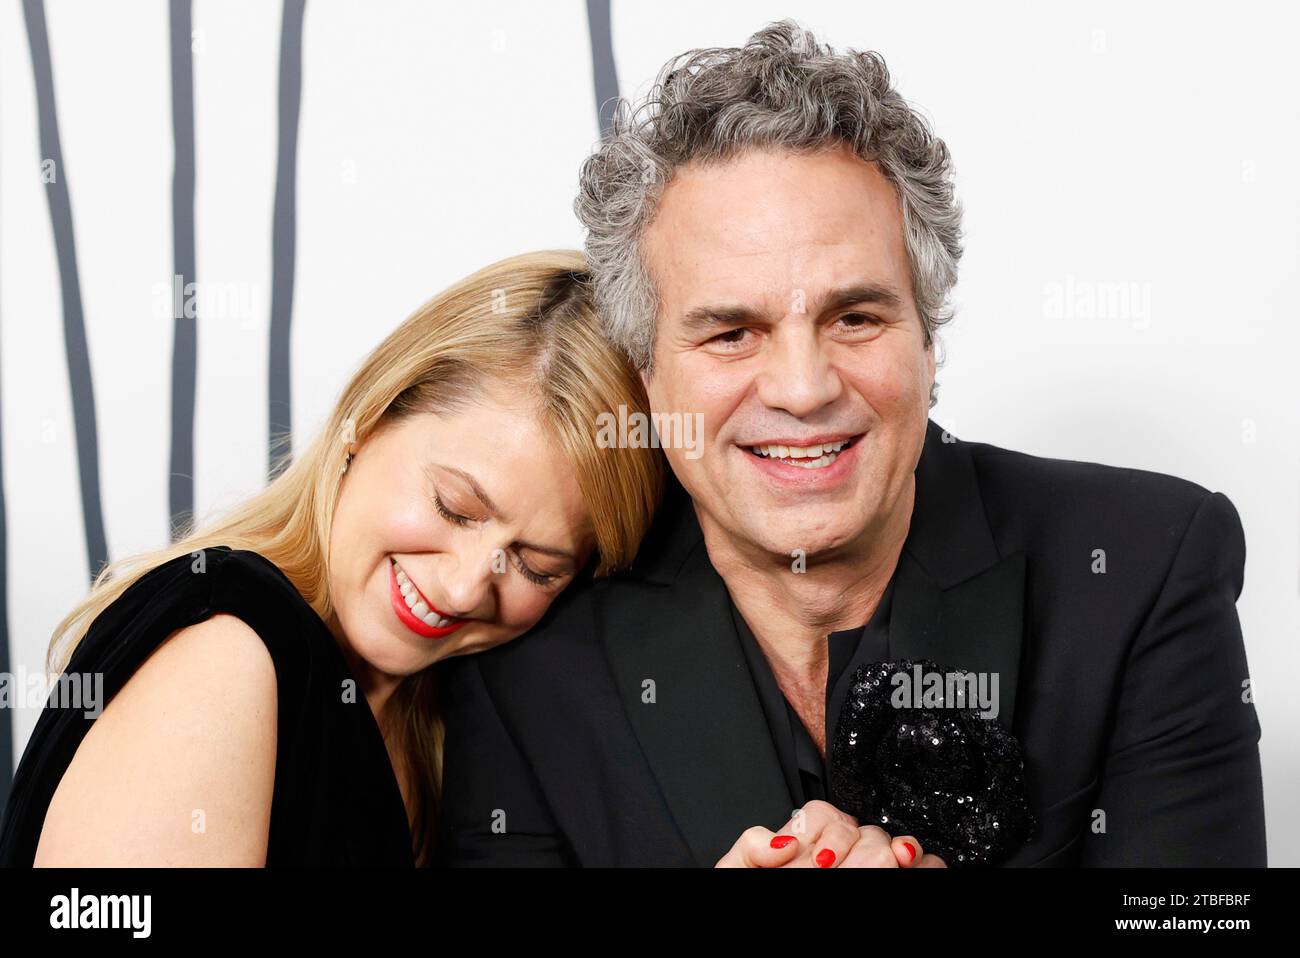 New York, United States. 06th Dec, 2023. Mark Ruffalo and Sunrise Coigney arrive on the red carpet at the 'Poor Things' premiere at DGA Theater on December 6, 2023 in New York City. Photo by John Angelillo/UPI Credit: UPI/Alamy Live News Stock Photo